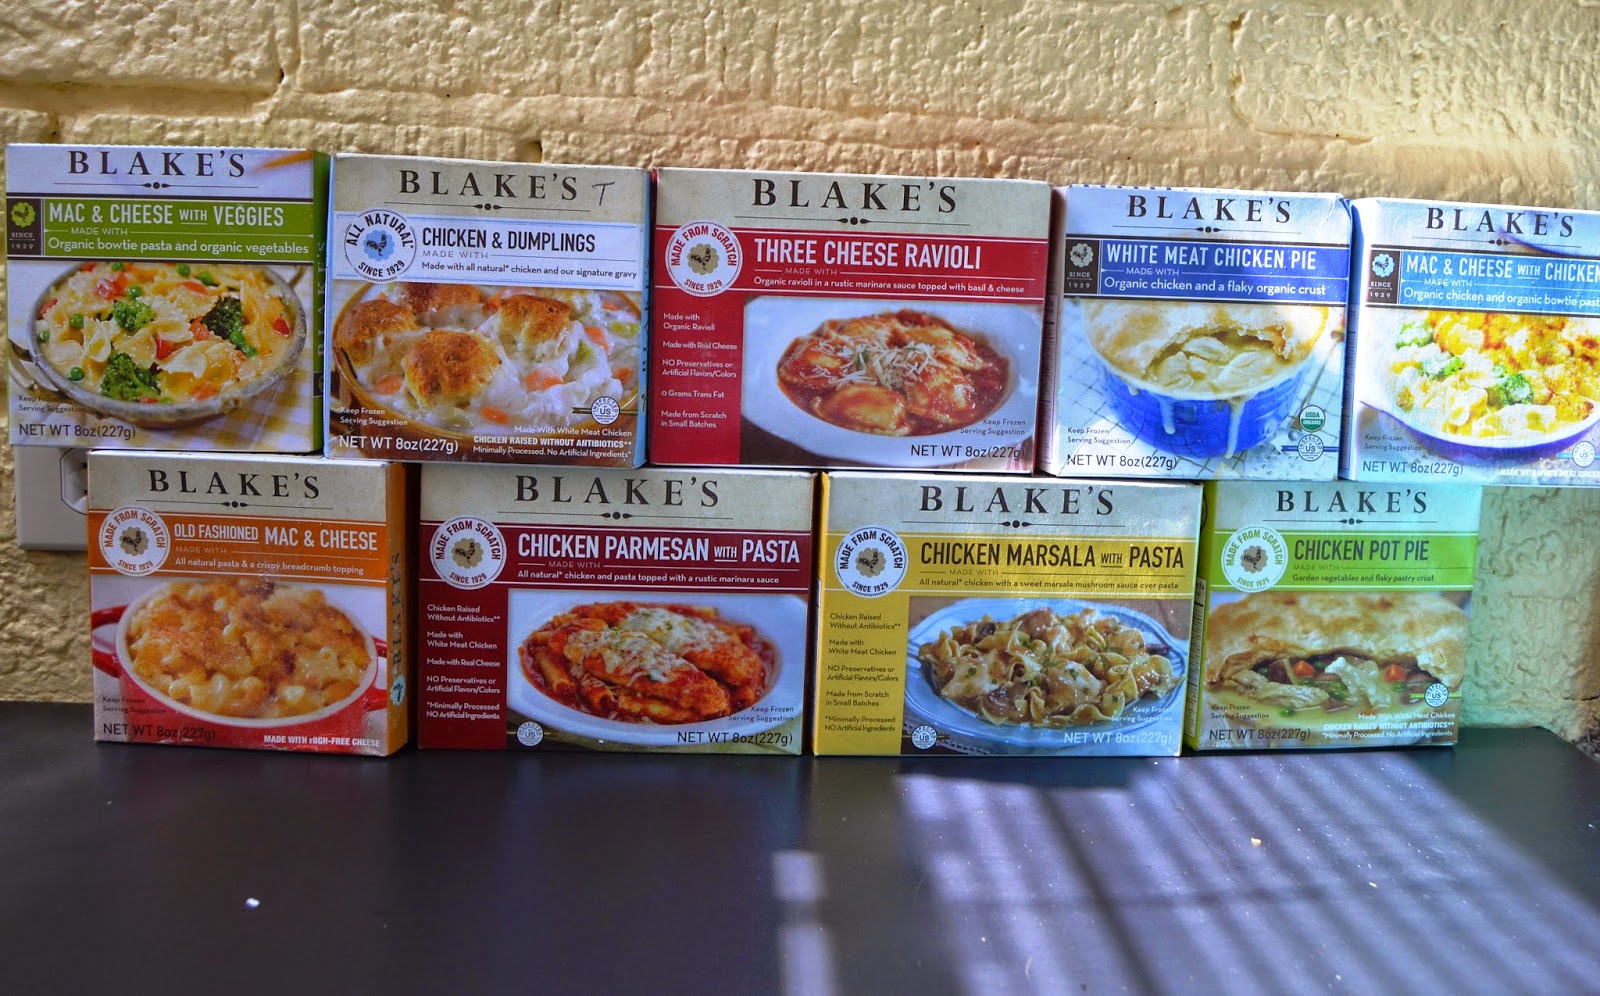 Blake's All Natural Foods